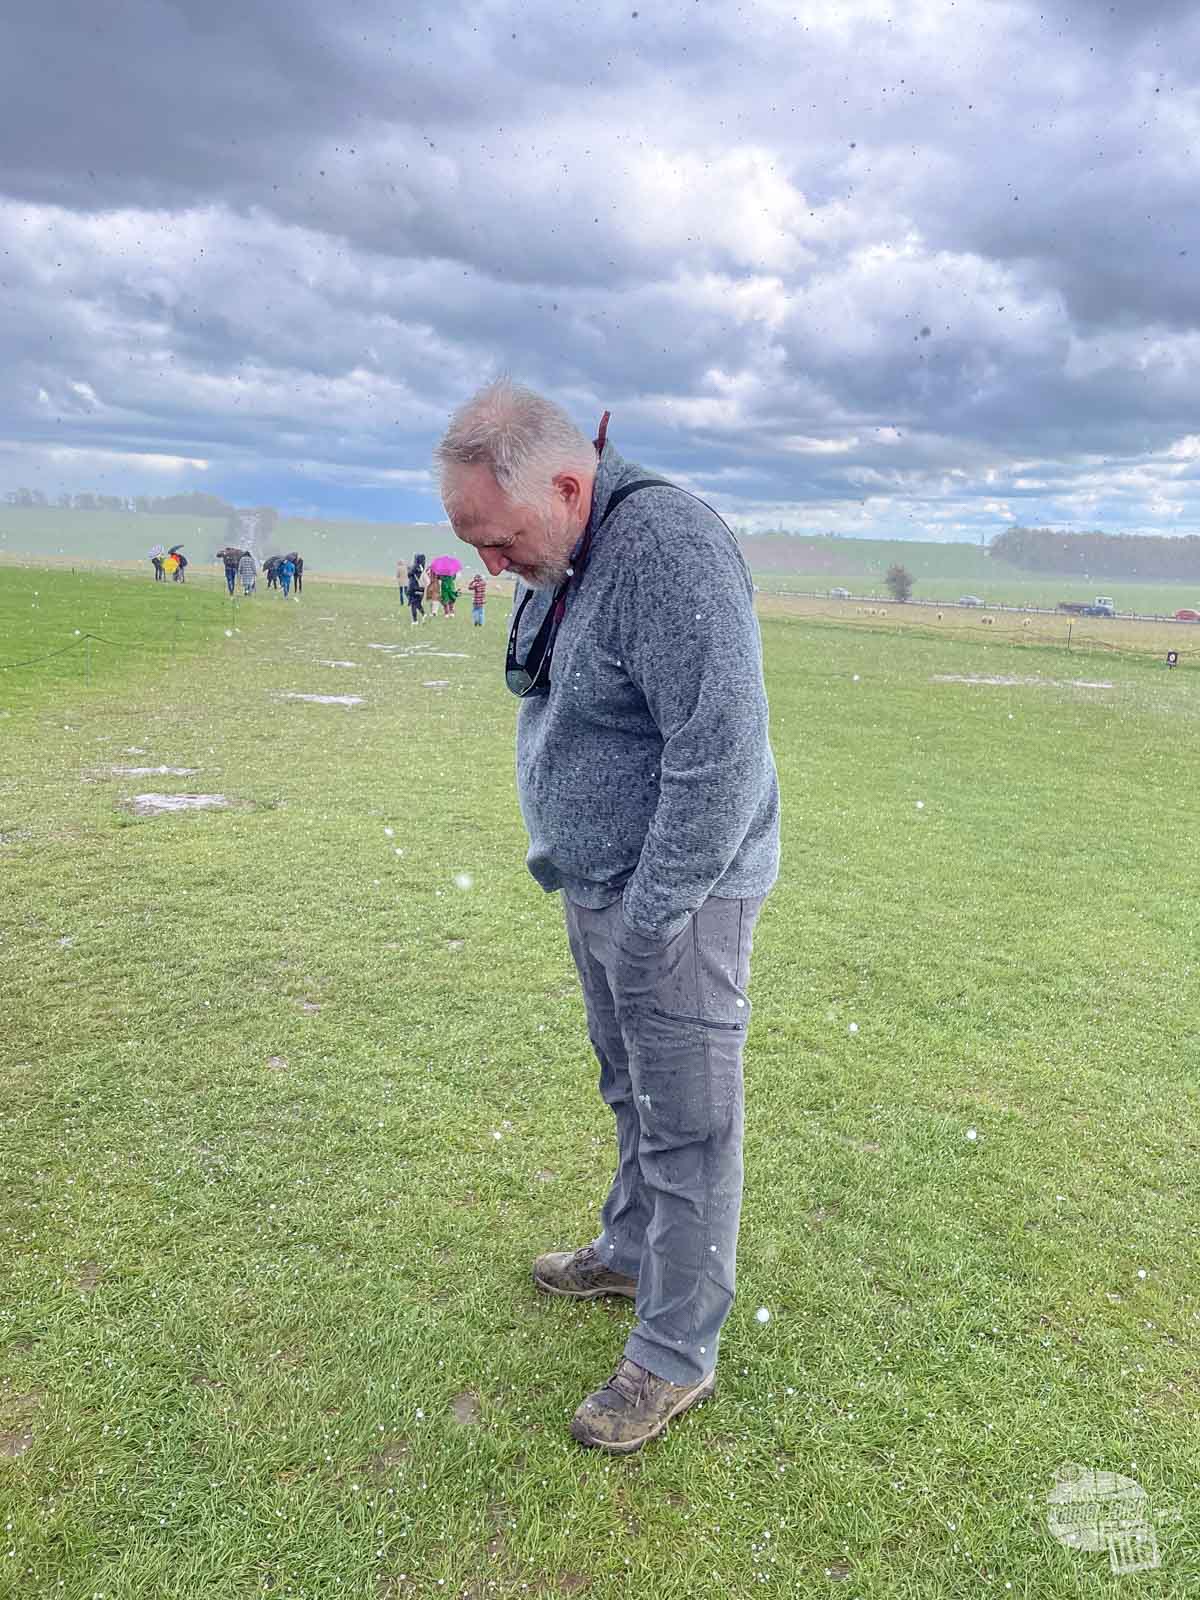 In the middle of a hail storm at Stonehenge.